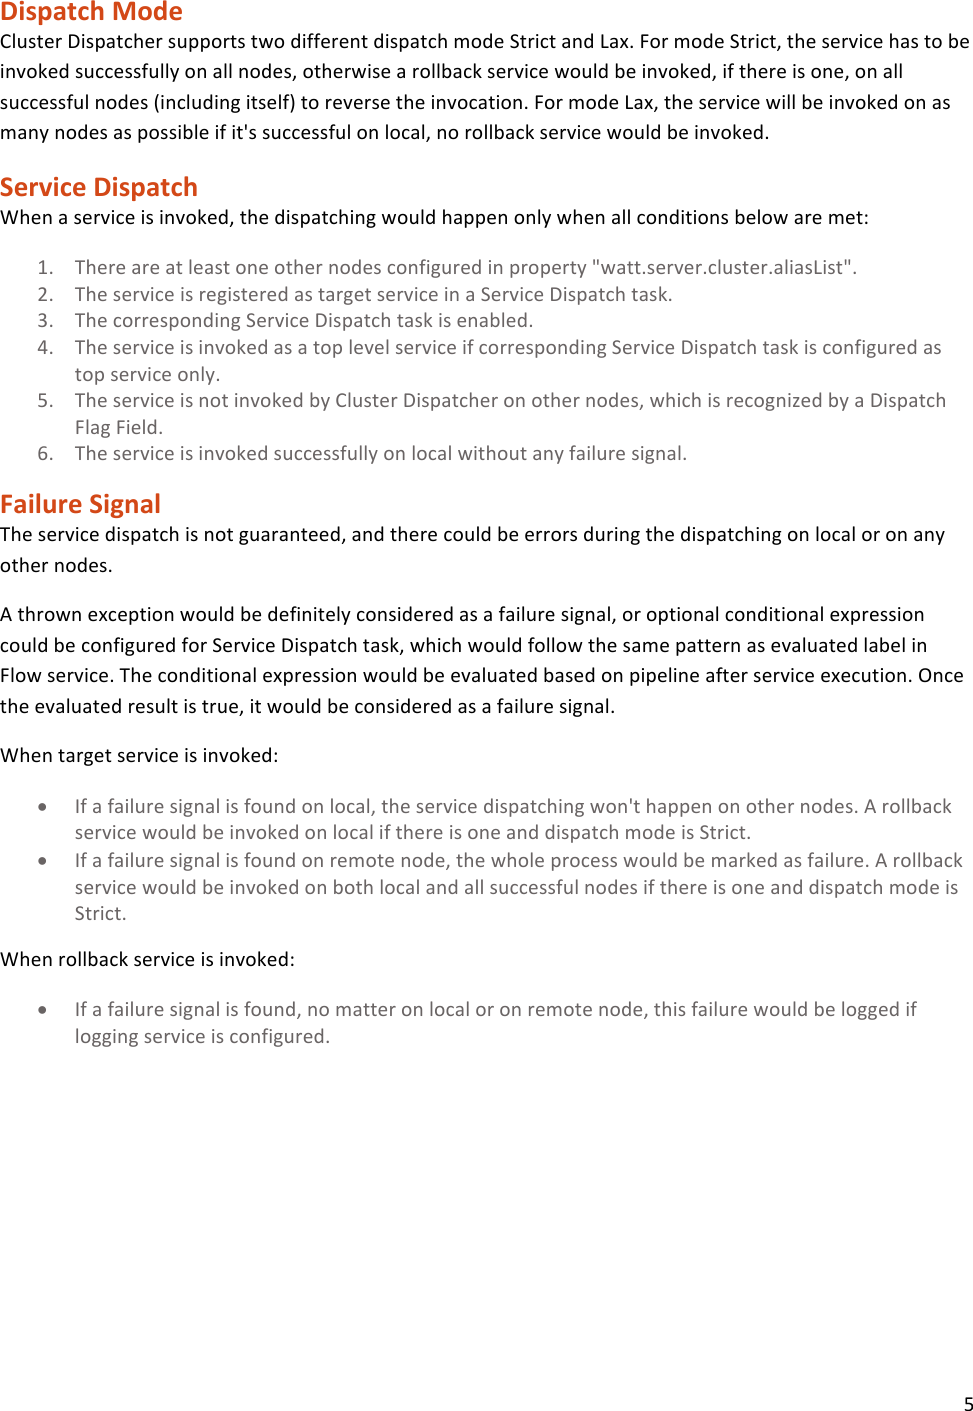 Page 5 of 9 - Hx Cluster Dispatcher-Users'Guide